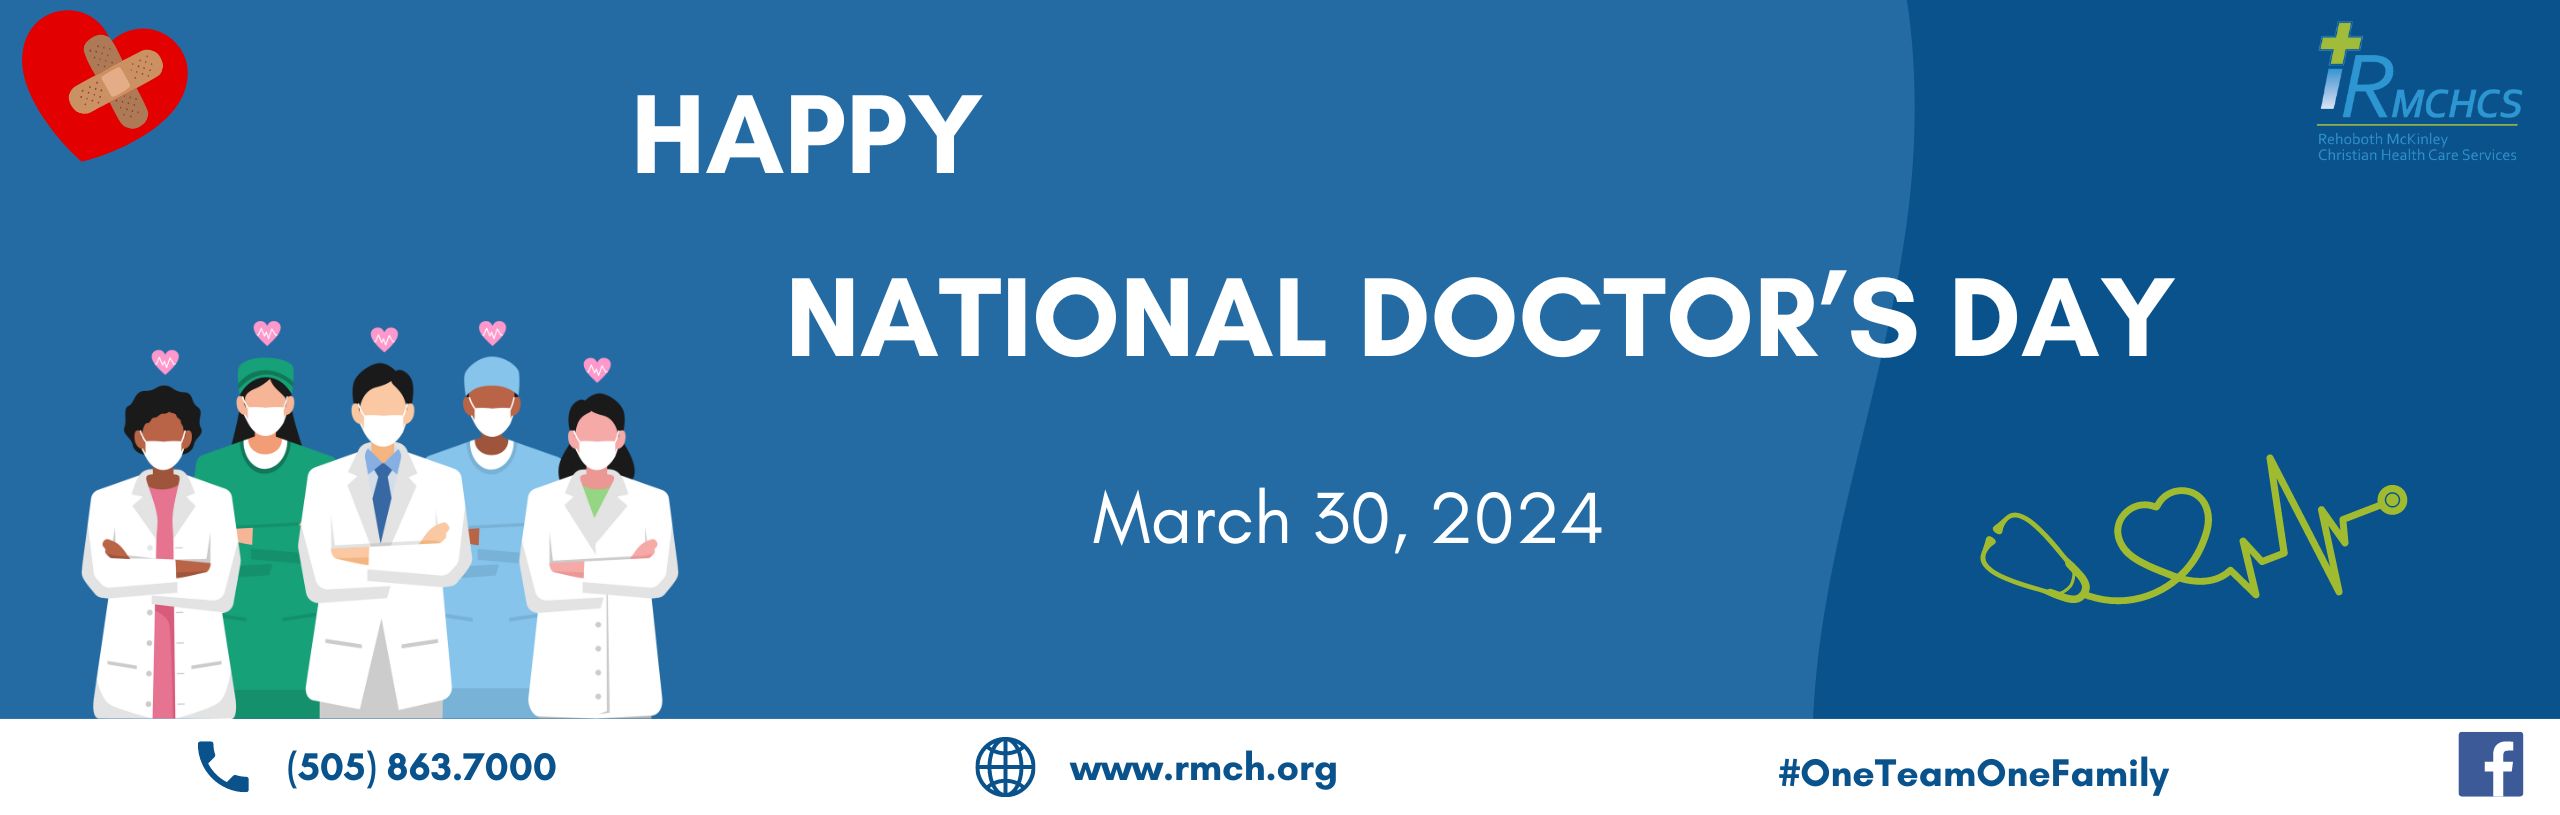 Happy National Doctors Day

March 30, 2024